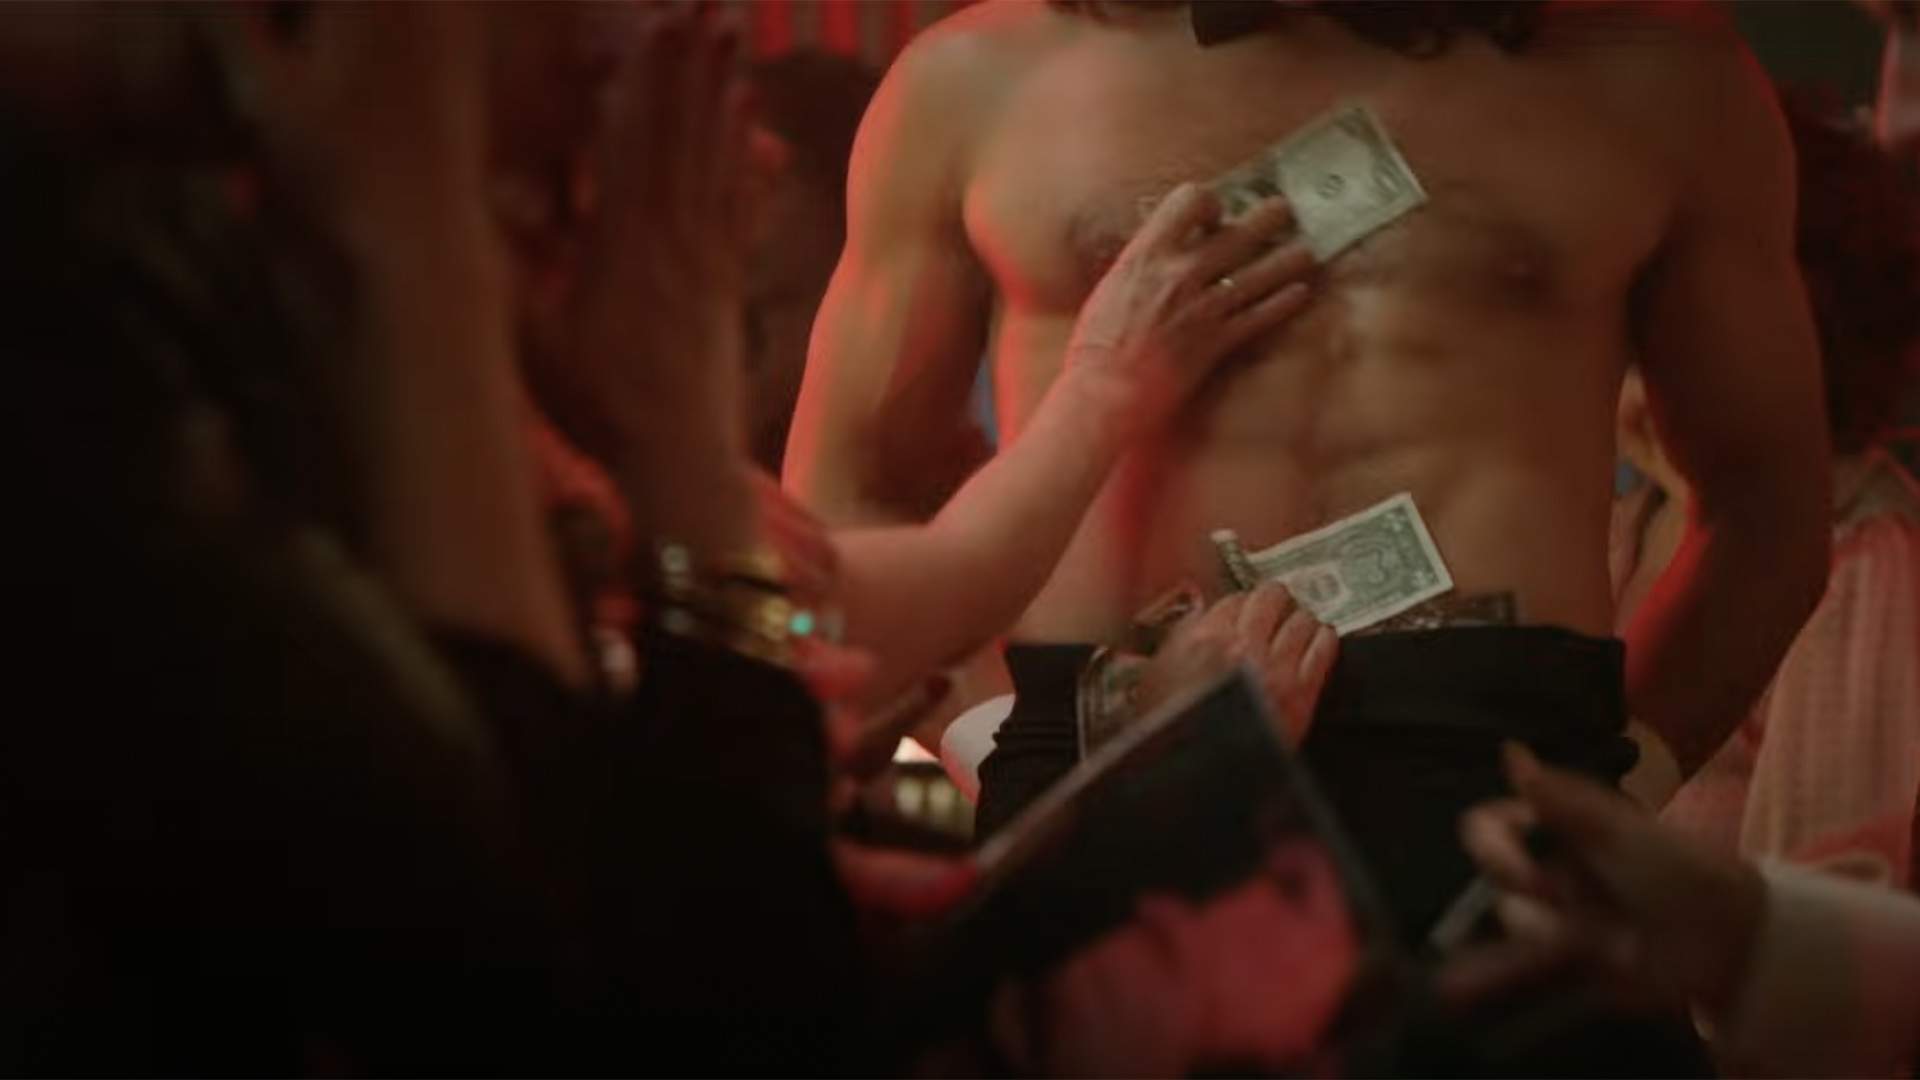 Murder, Money and Male Strip Clubs: That's the Full Trailer for Disney+'s 'Welcome to Chippendales'